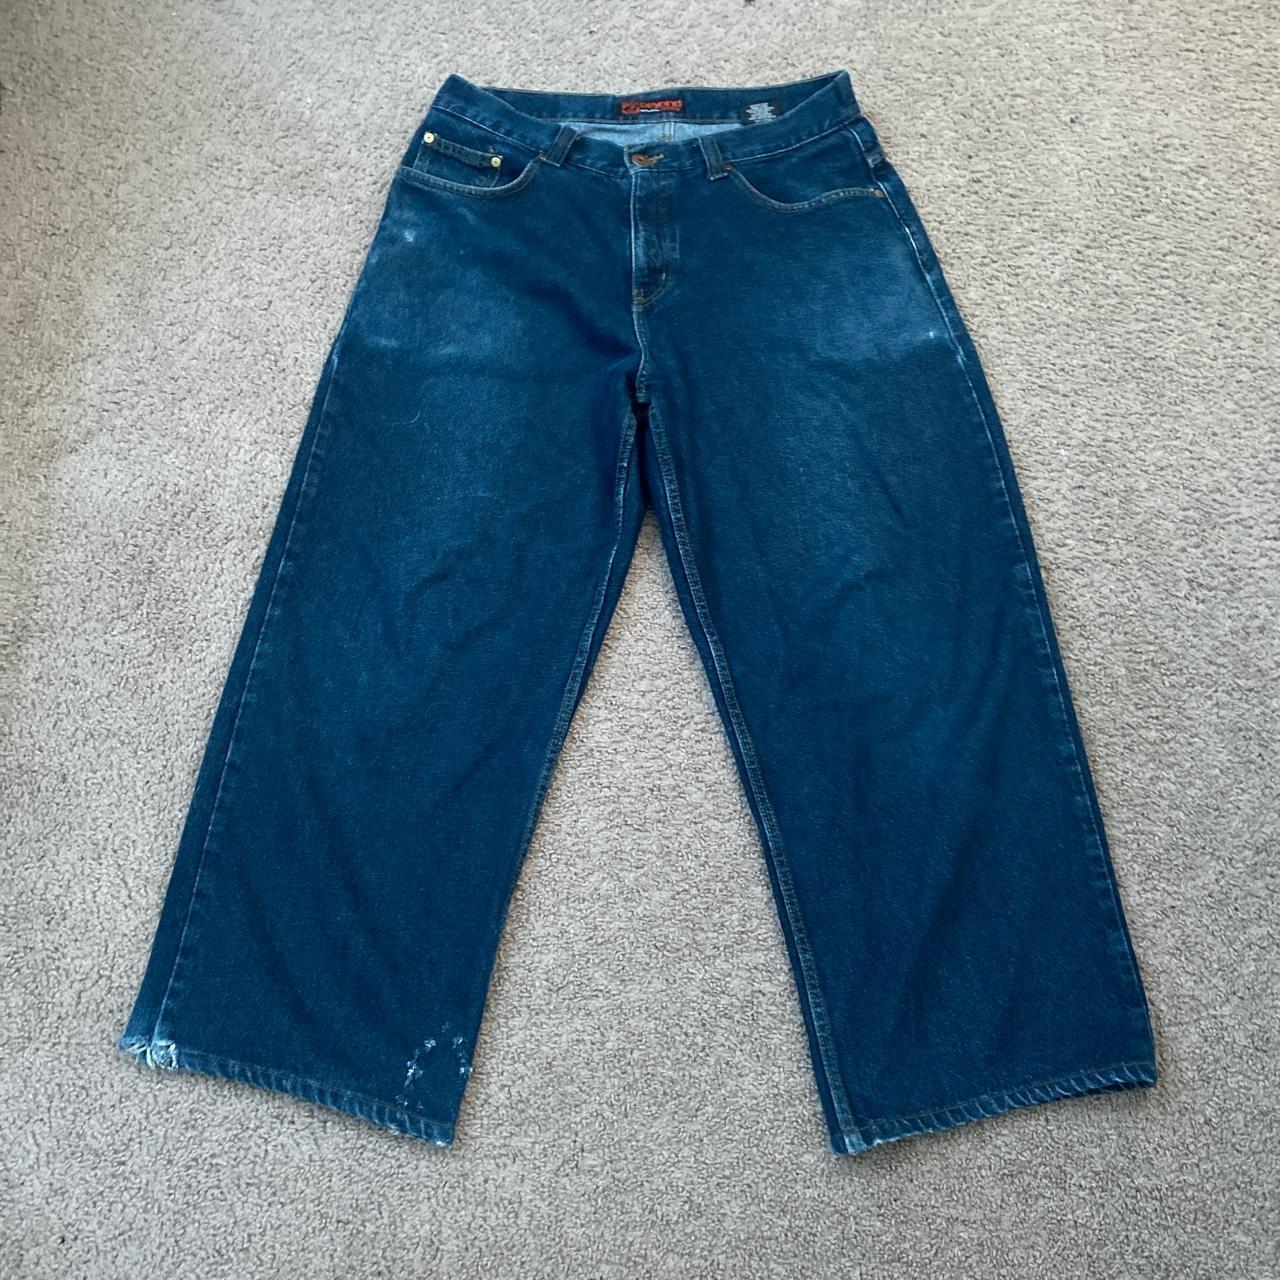 Anchor Blue Men's Navy and Blue Jeans